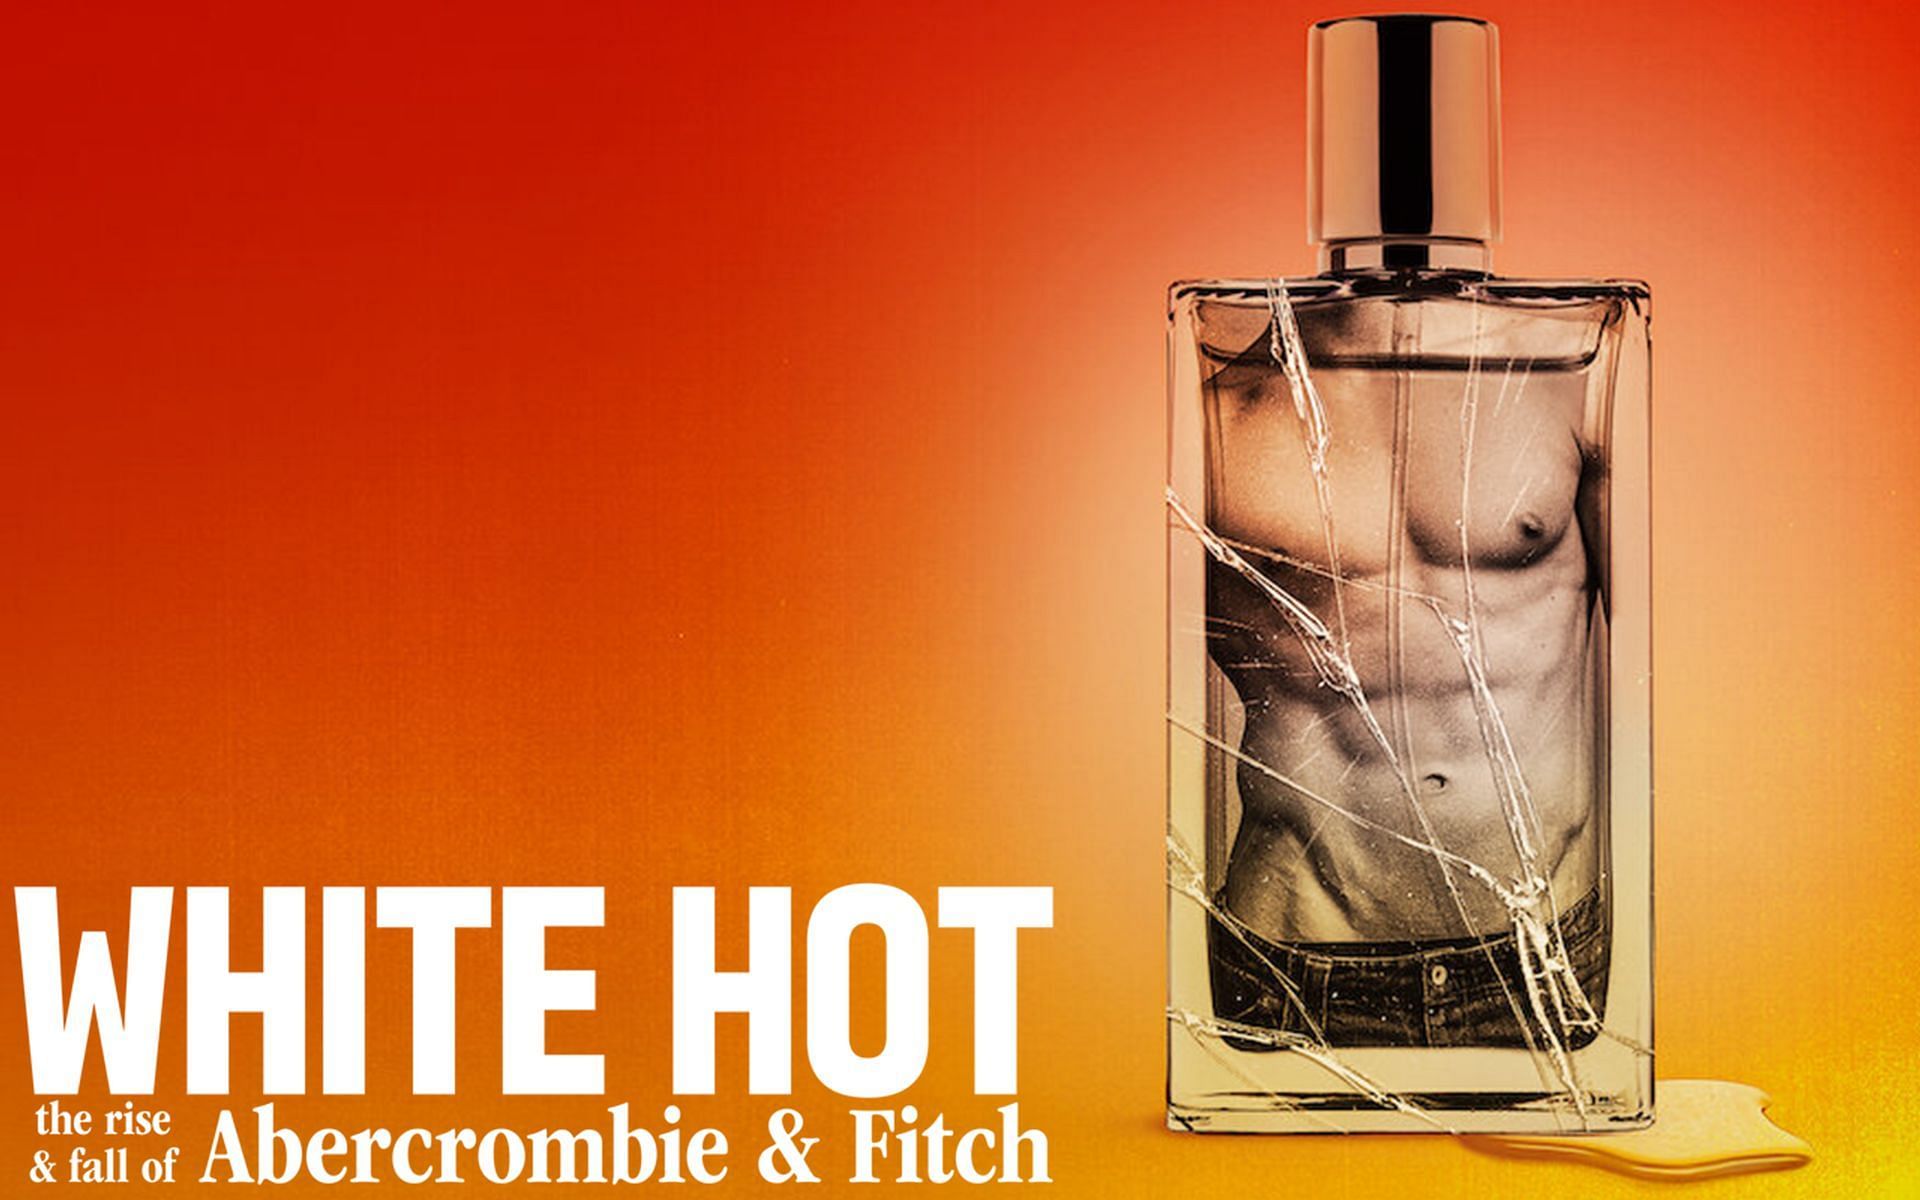 White Hot: The Rise and Fall of Abercrombie &amp; Fitch will be released on Netflix on April 19, 2022 (Image via Netflix)